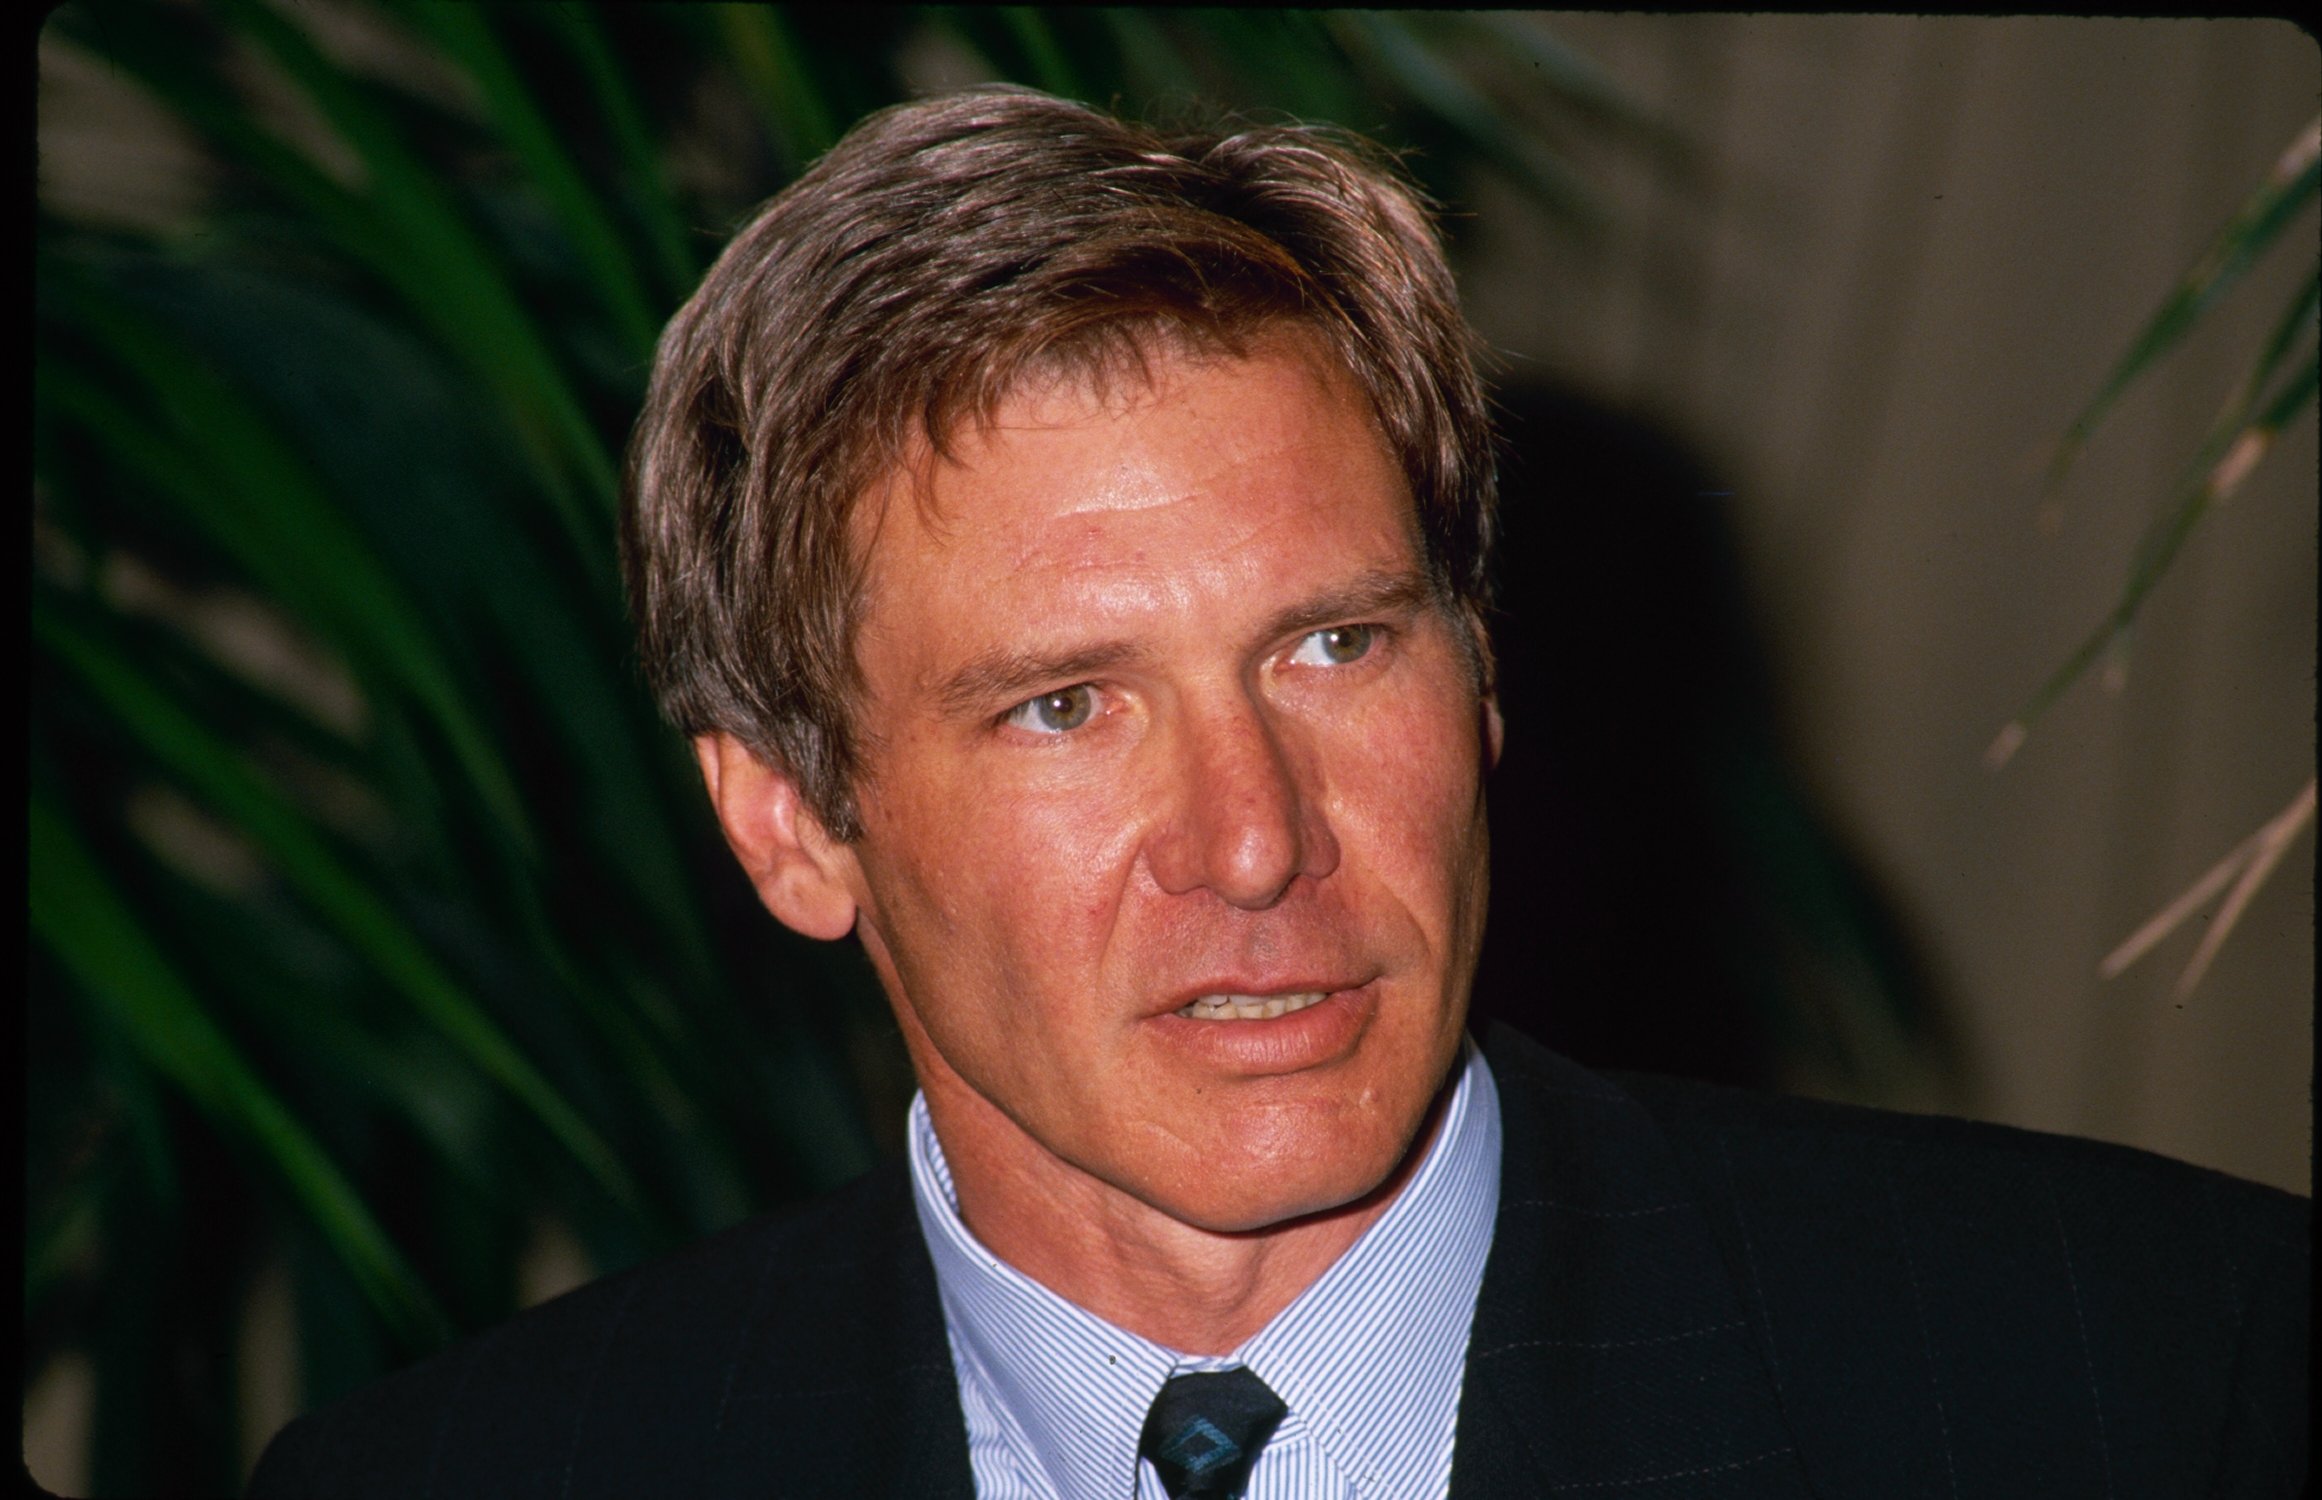 Harrison Ford in a suit